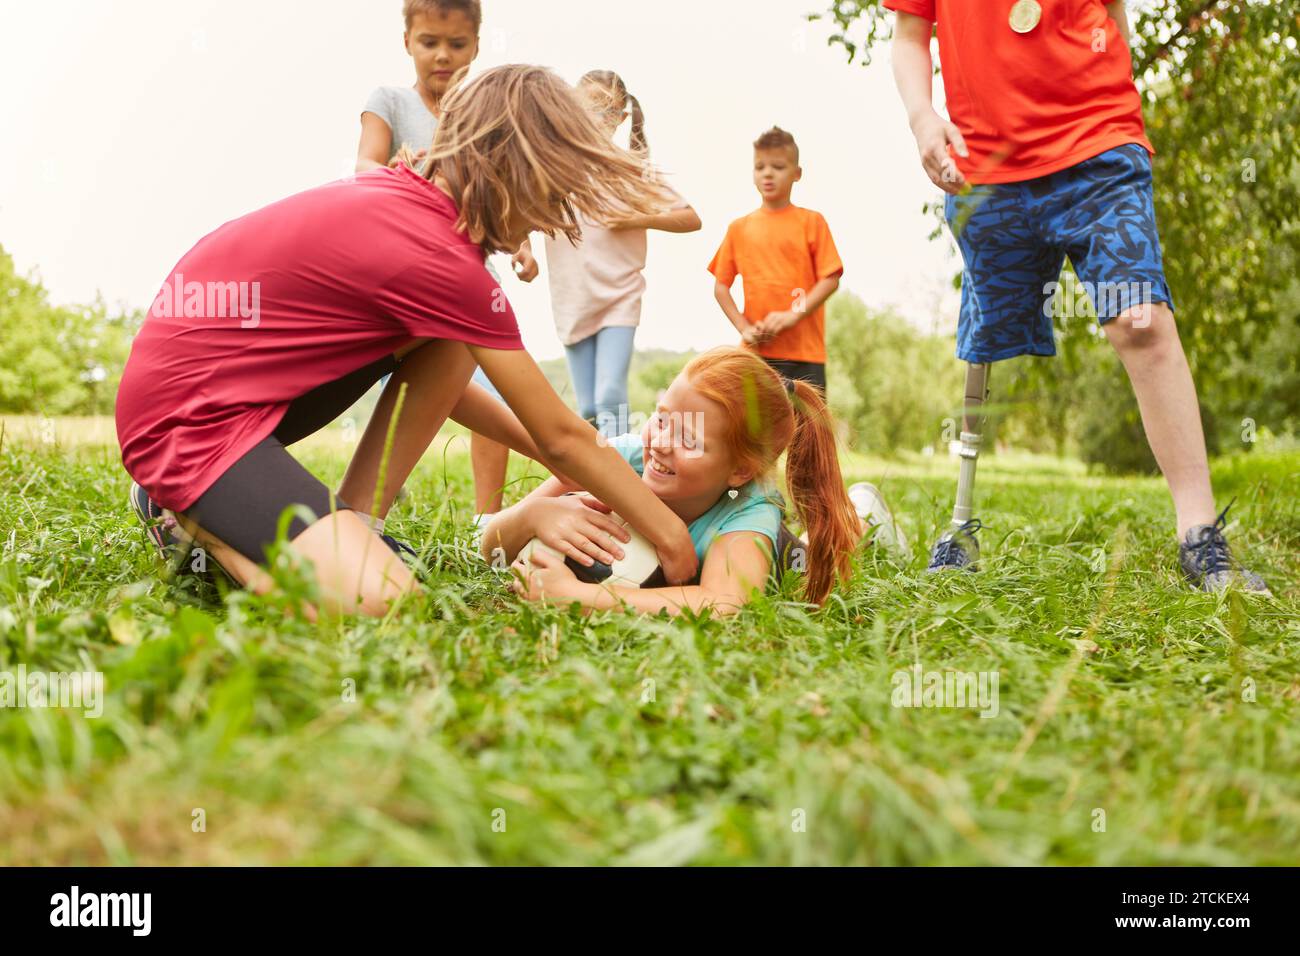 Female friends having fun while playing soccer on grass at park Stock Photo